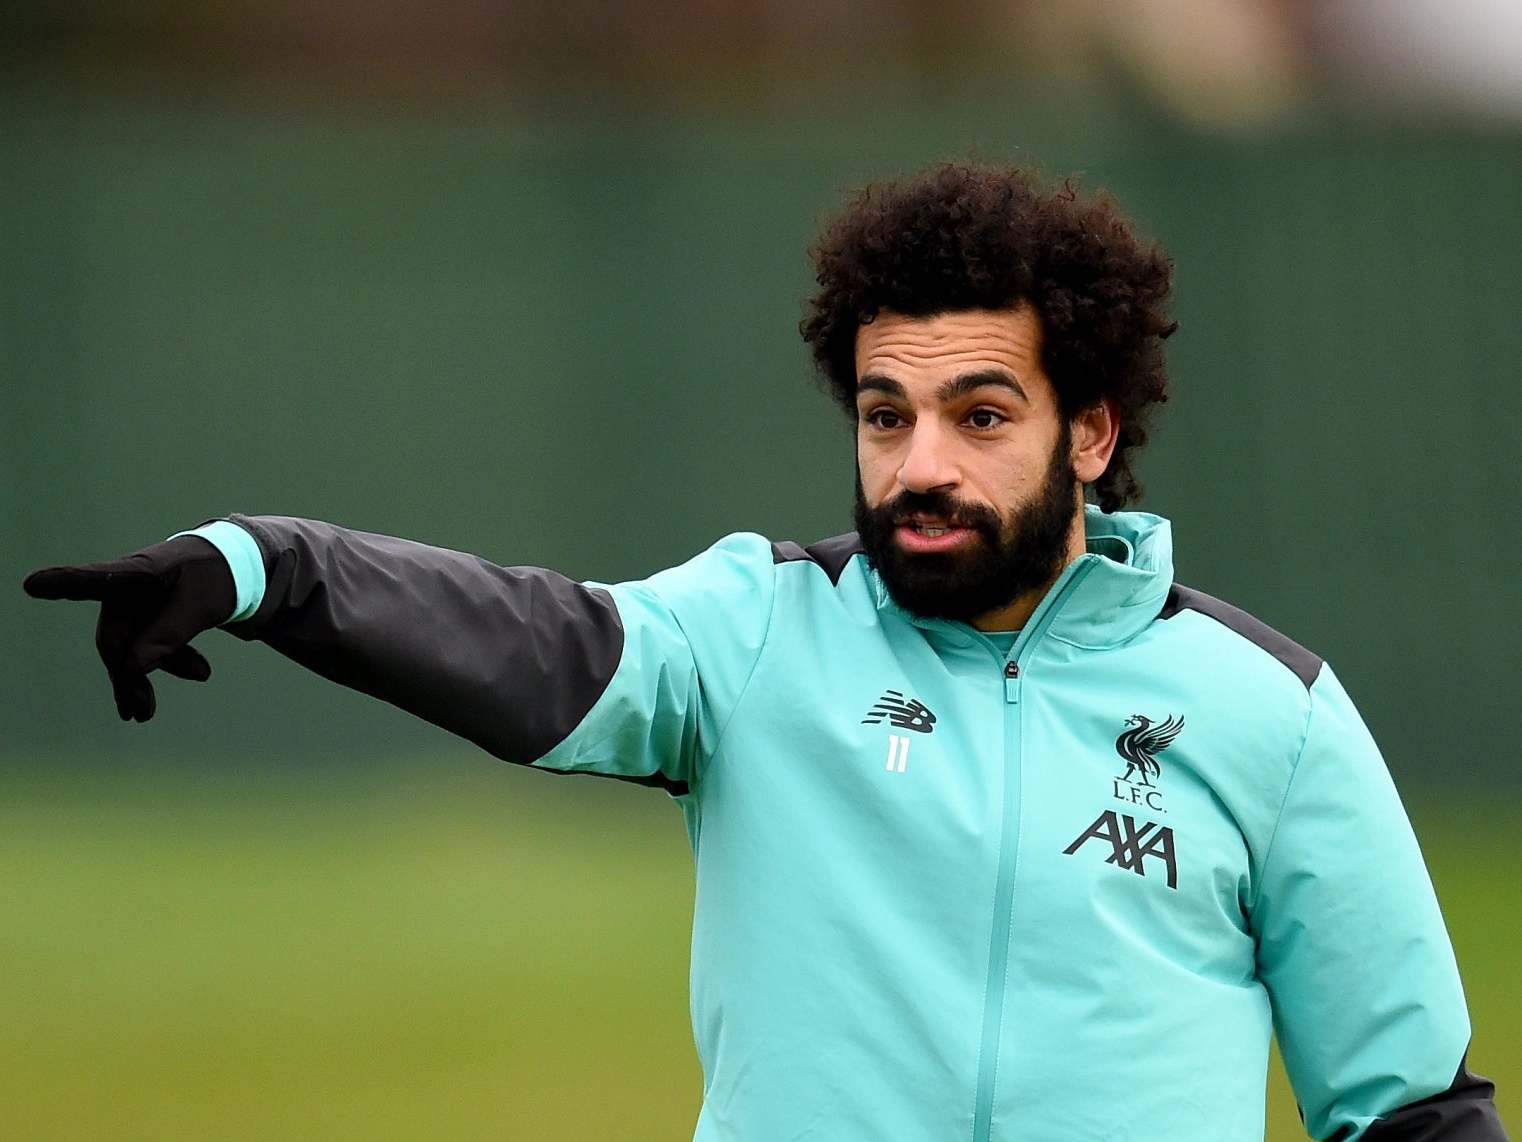 Salah will be forced to choose between club and country